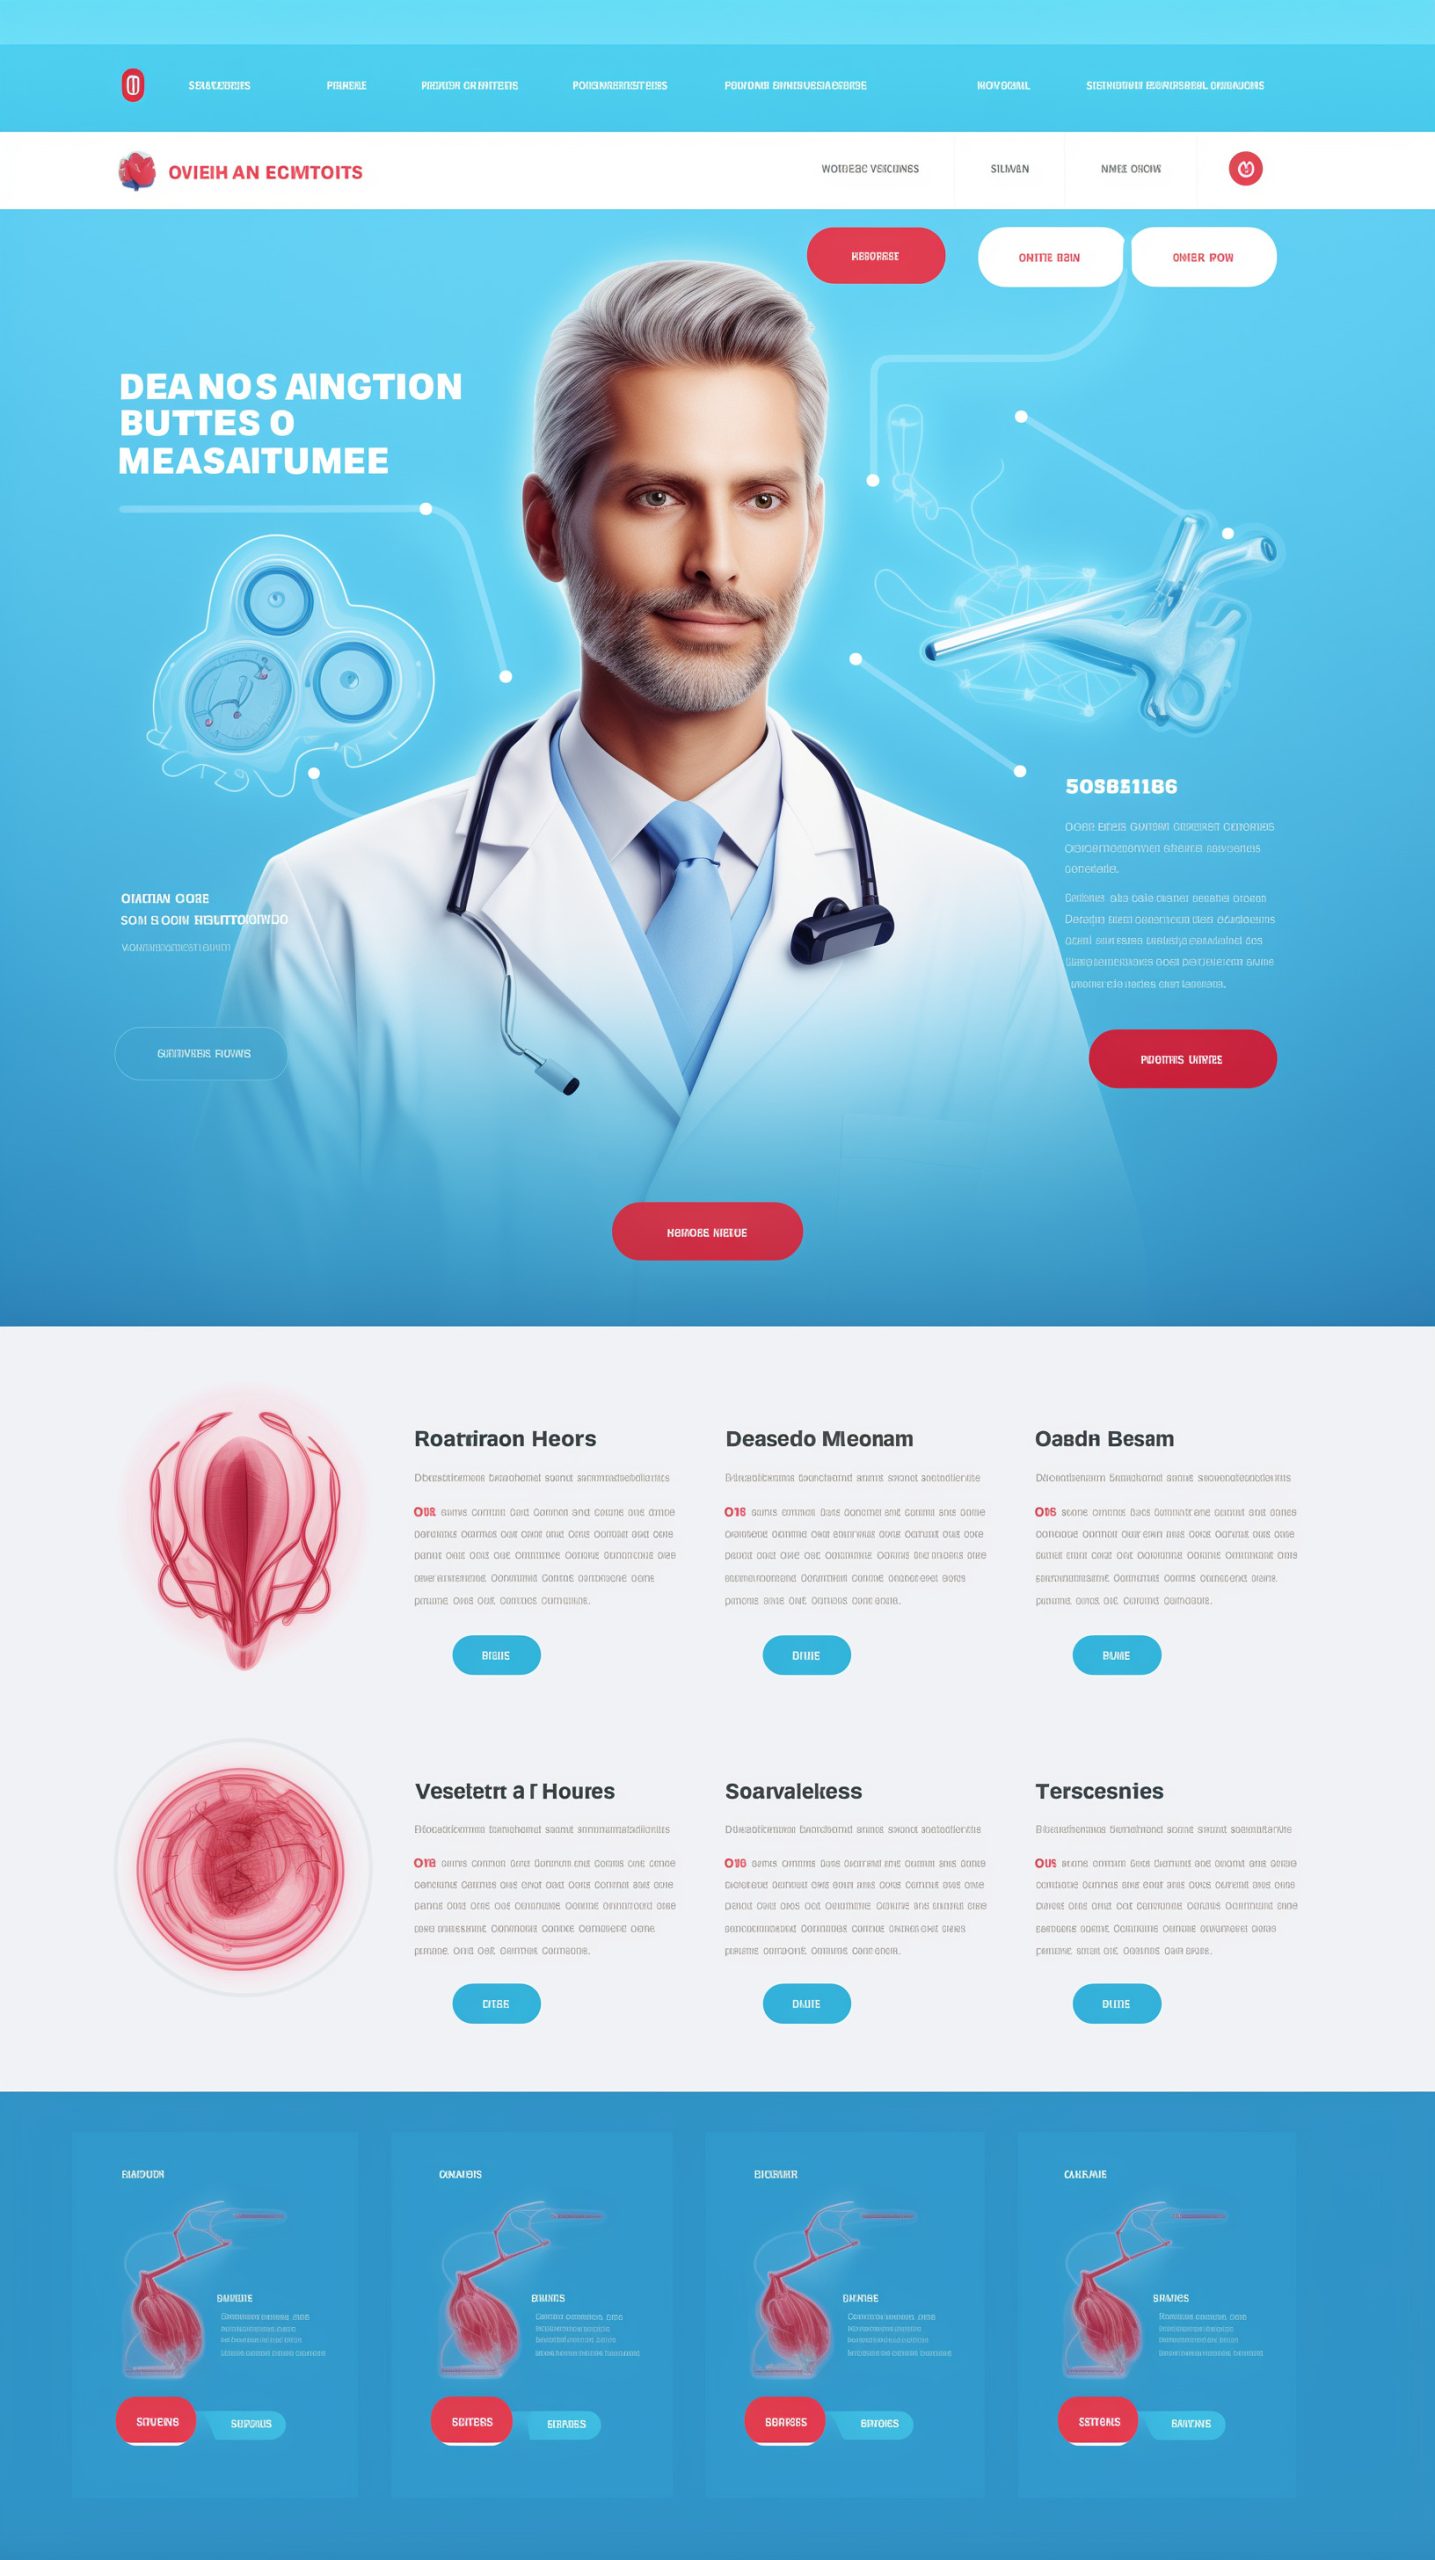 Build a professional online presence with medical templates